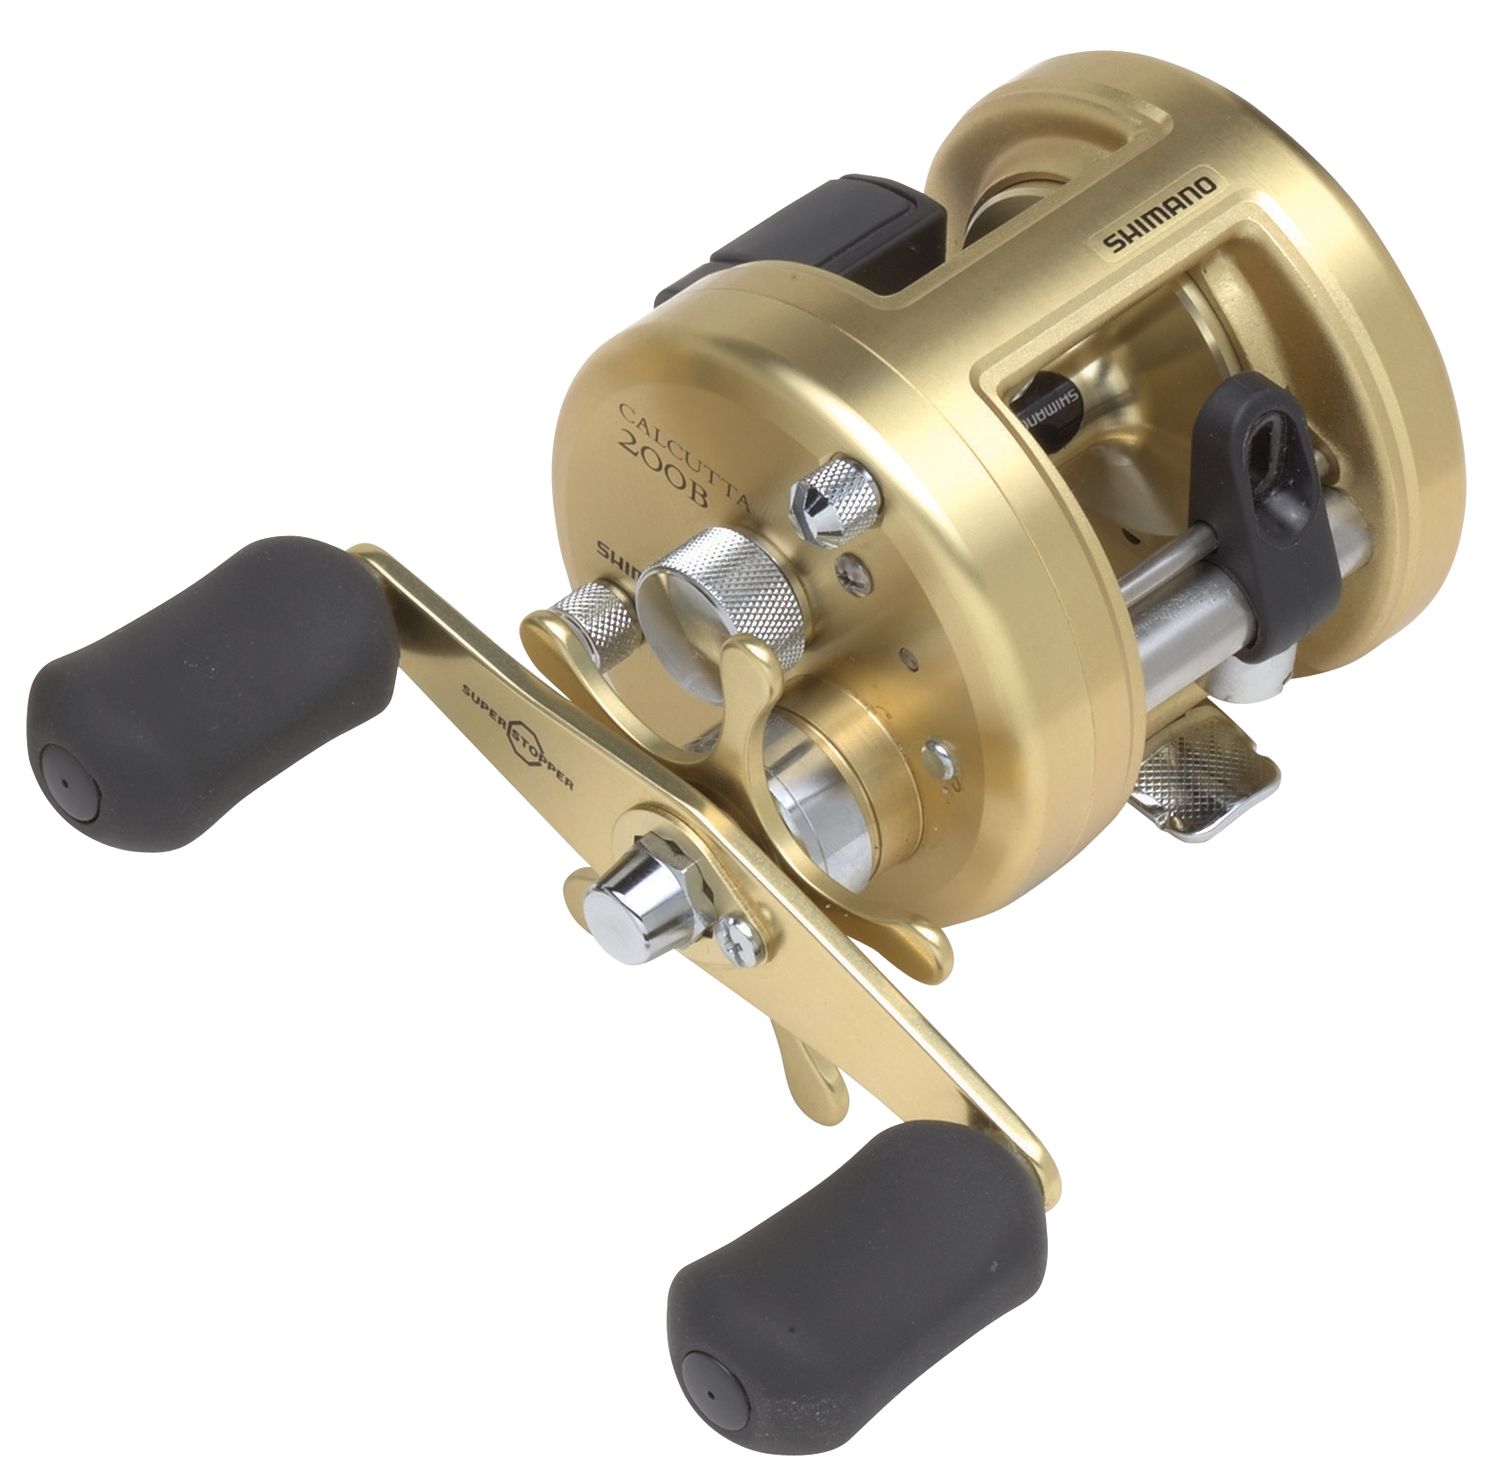 Photos - Other for Fishing Shimano Calcutta Round Baitcasting Reel 15SHMUCLCTT200BXXREE 